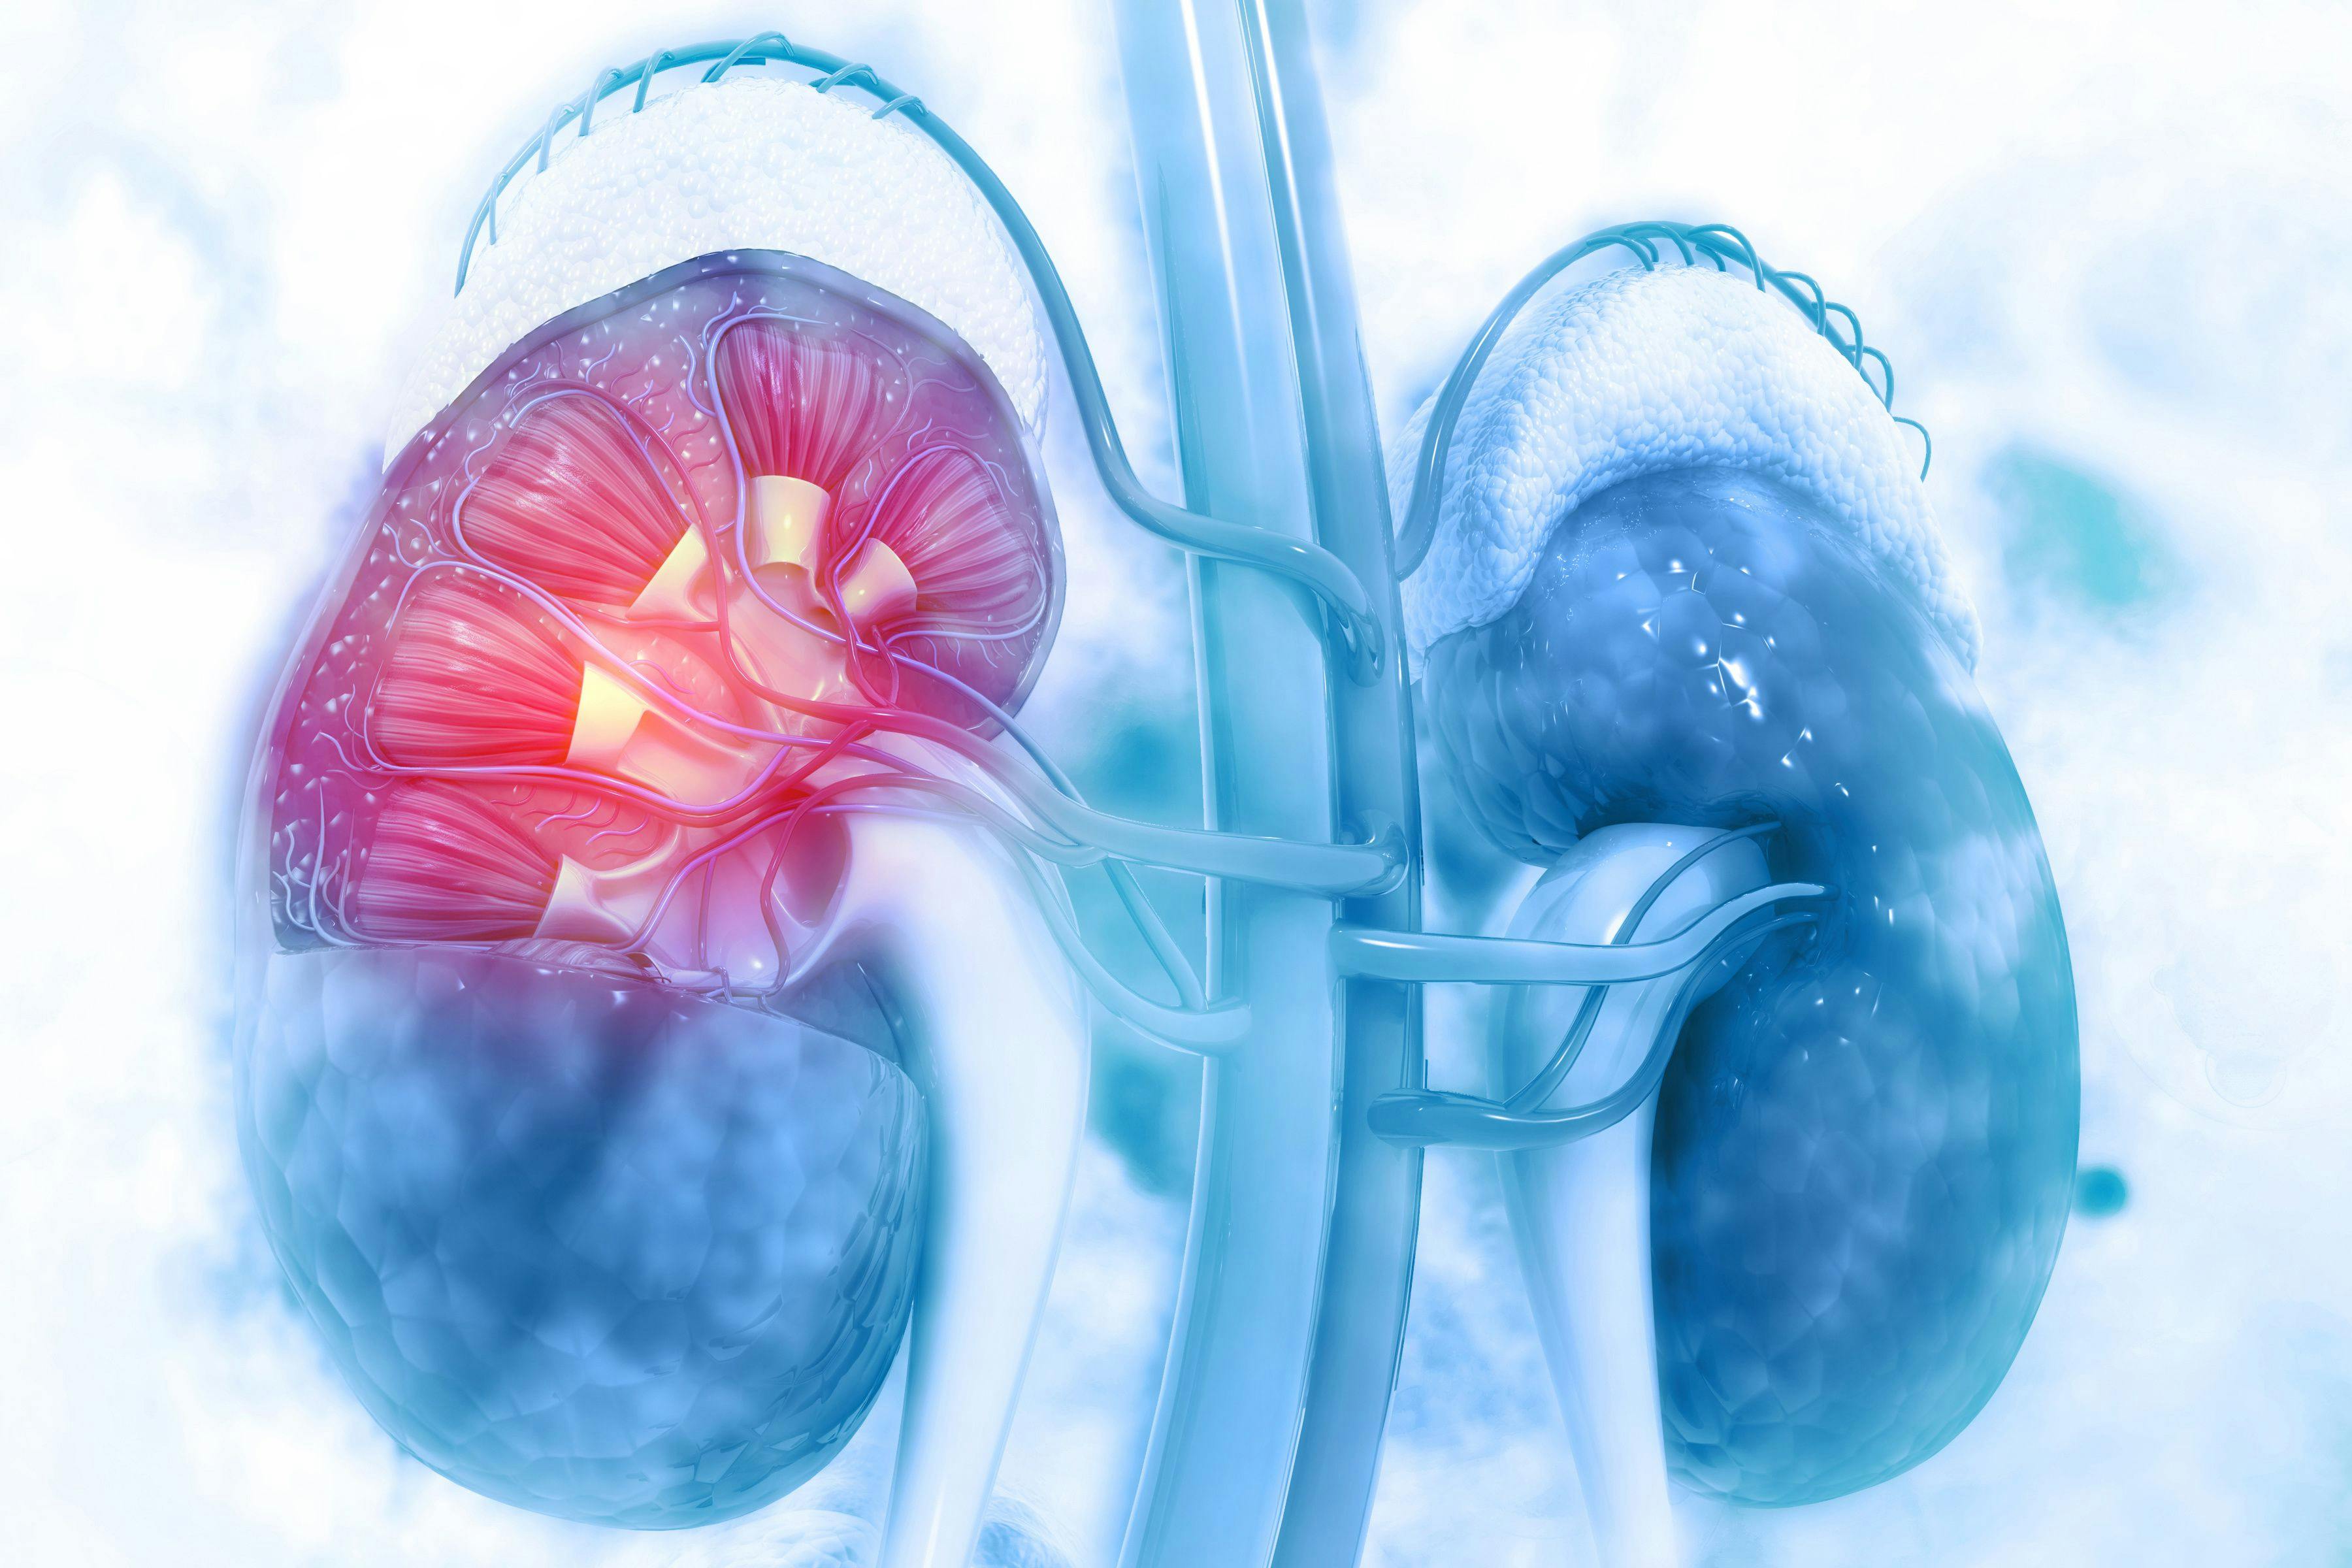 chronic kidney disease, primary care physicians, primary care, renal disease